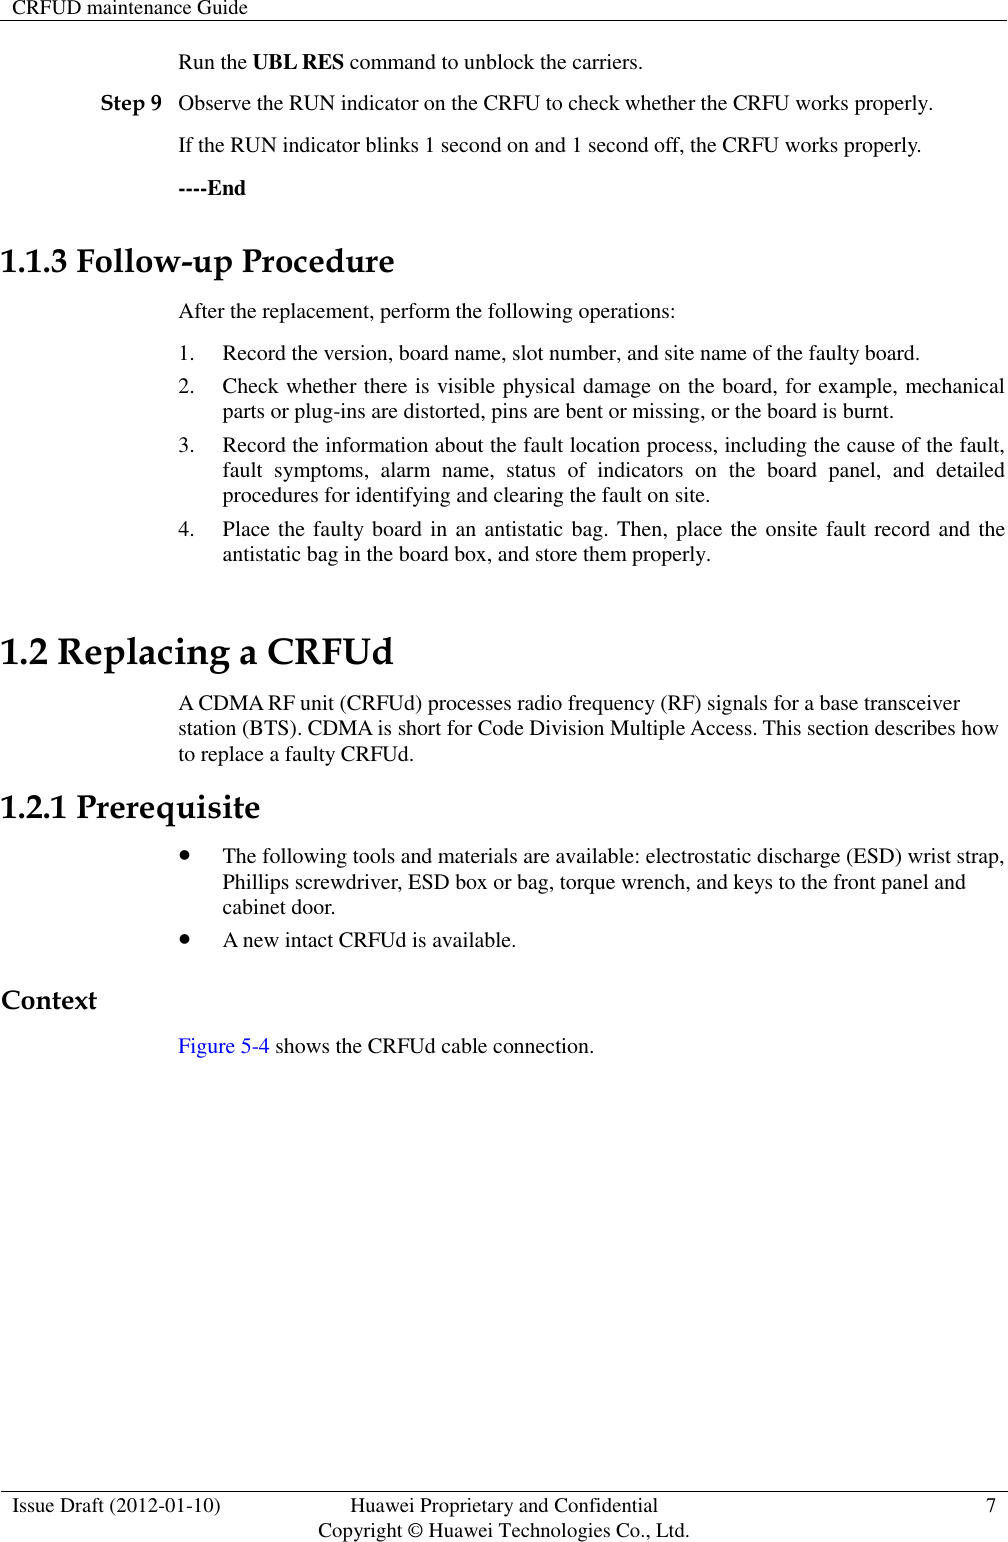 CRFUD maintenance Guide   Issue Draft (2012-01-10) Huawei Proprietary and Confidential                                     Copyright © Huawei Technologies Co., Ltd. 7  Run the UBL RES command to unblock the carriers. Step 9 Observe the RUN indicator on the CRFU to check whether the CRFU works properly.   If the RUN indicator blinks 1 second on and 1 second off, the CRFU works properly.   ----End 1.1.3 Follow-up Procedure After the replacement, perform the following operations: 1. Record the version, board name, slot number, and site name of the faulty board. 2. Check whether there is visible physical damage on the board, for example, mechanical parts or plug-ins are distorted, pins are bent or missing, or the board is burnt. 3. Record the information about the fault location process, including the cause of the fault, fault  symptoms,  alarm  name,  status  of  indicators  on  the  board  panel,  and  detailed procedures for identifying and clearing the fault on site. 4. Place the faulty board in an antistatic bag. Then, place the onsite fault record and the antistatic bag in the board box, and store them properly. 1.2 Replacing a CRFUd A CDMA RF unit (CRFUd) processes radio frequency (RF) signals for a base transceiver station (BTS). CDMA is short for Code Division Multiple Access. This section describes how to replace a faulty CRFUd. 1.2.1 Prerequisite  The following tools and materials are available: electrostatic discharge (ESD) wrist strap, Phillips screwdriver, ESD box or bag, torque wrench, and keys to the front panel and cabinet door.  A new intact CRFUd is available.   Context Figure 5-4 shows the CRFUd cable connection. 